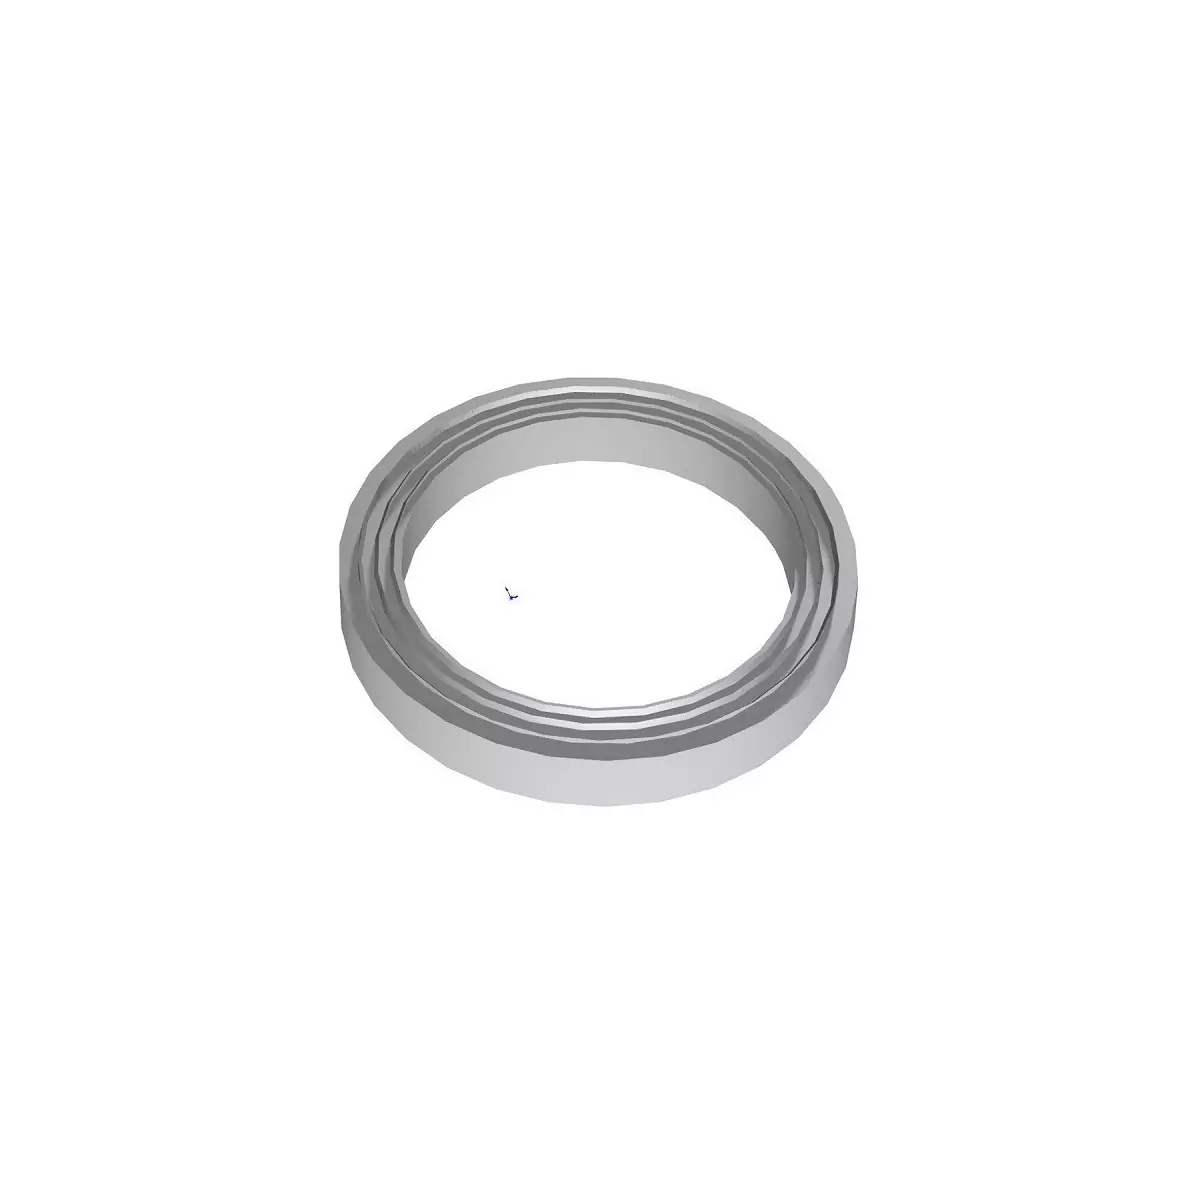 2 inch gasket for LDPE camlock fitting